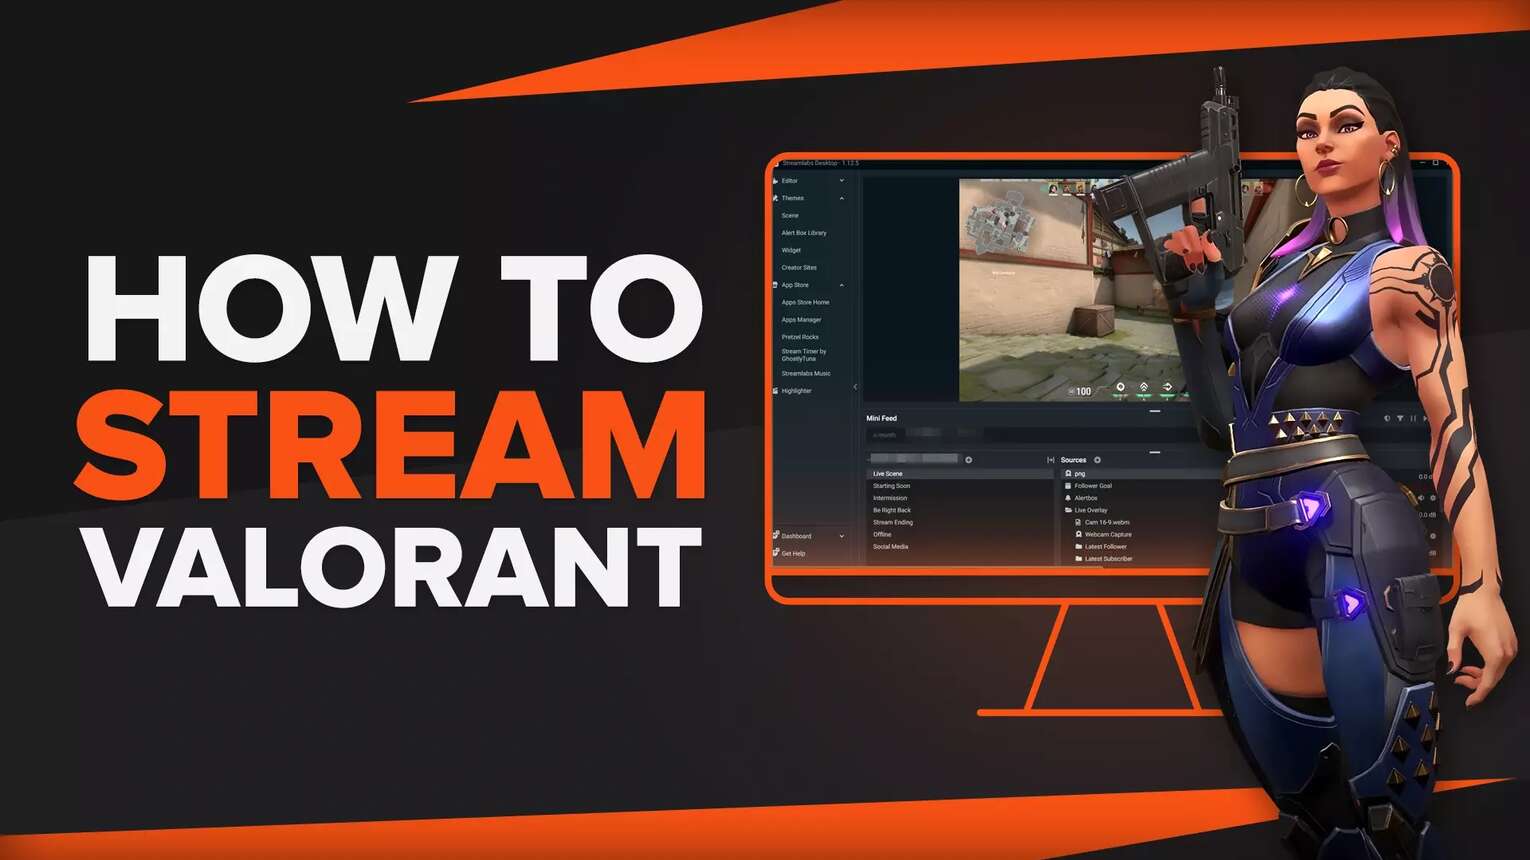 How To Stream Valorant [Streamlabs Full Guide]